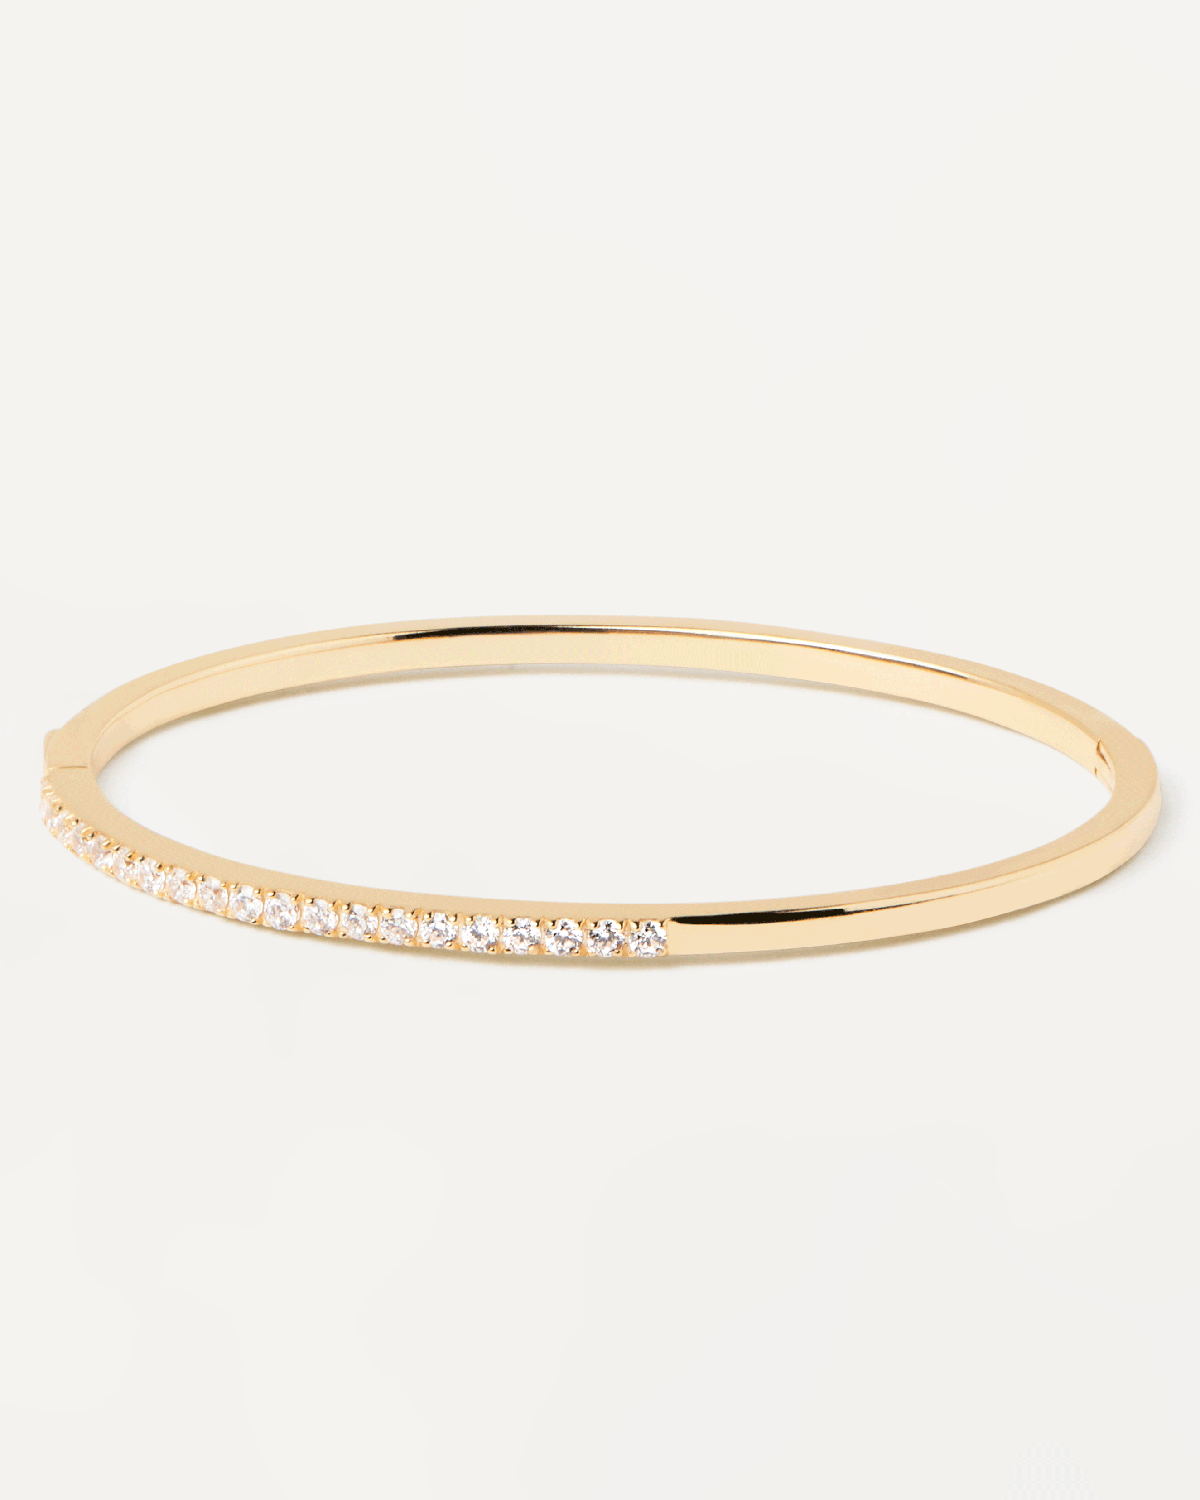 2023 Selection | April Bangle. Gold-plated silver hinged rigid bracelet with 2 bands of white zirconia. Get the latest arrival from PDPAOLA. Place your order safely and get this Best Seller. Free Shipping.